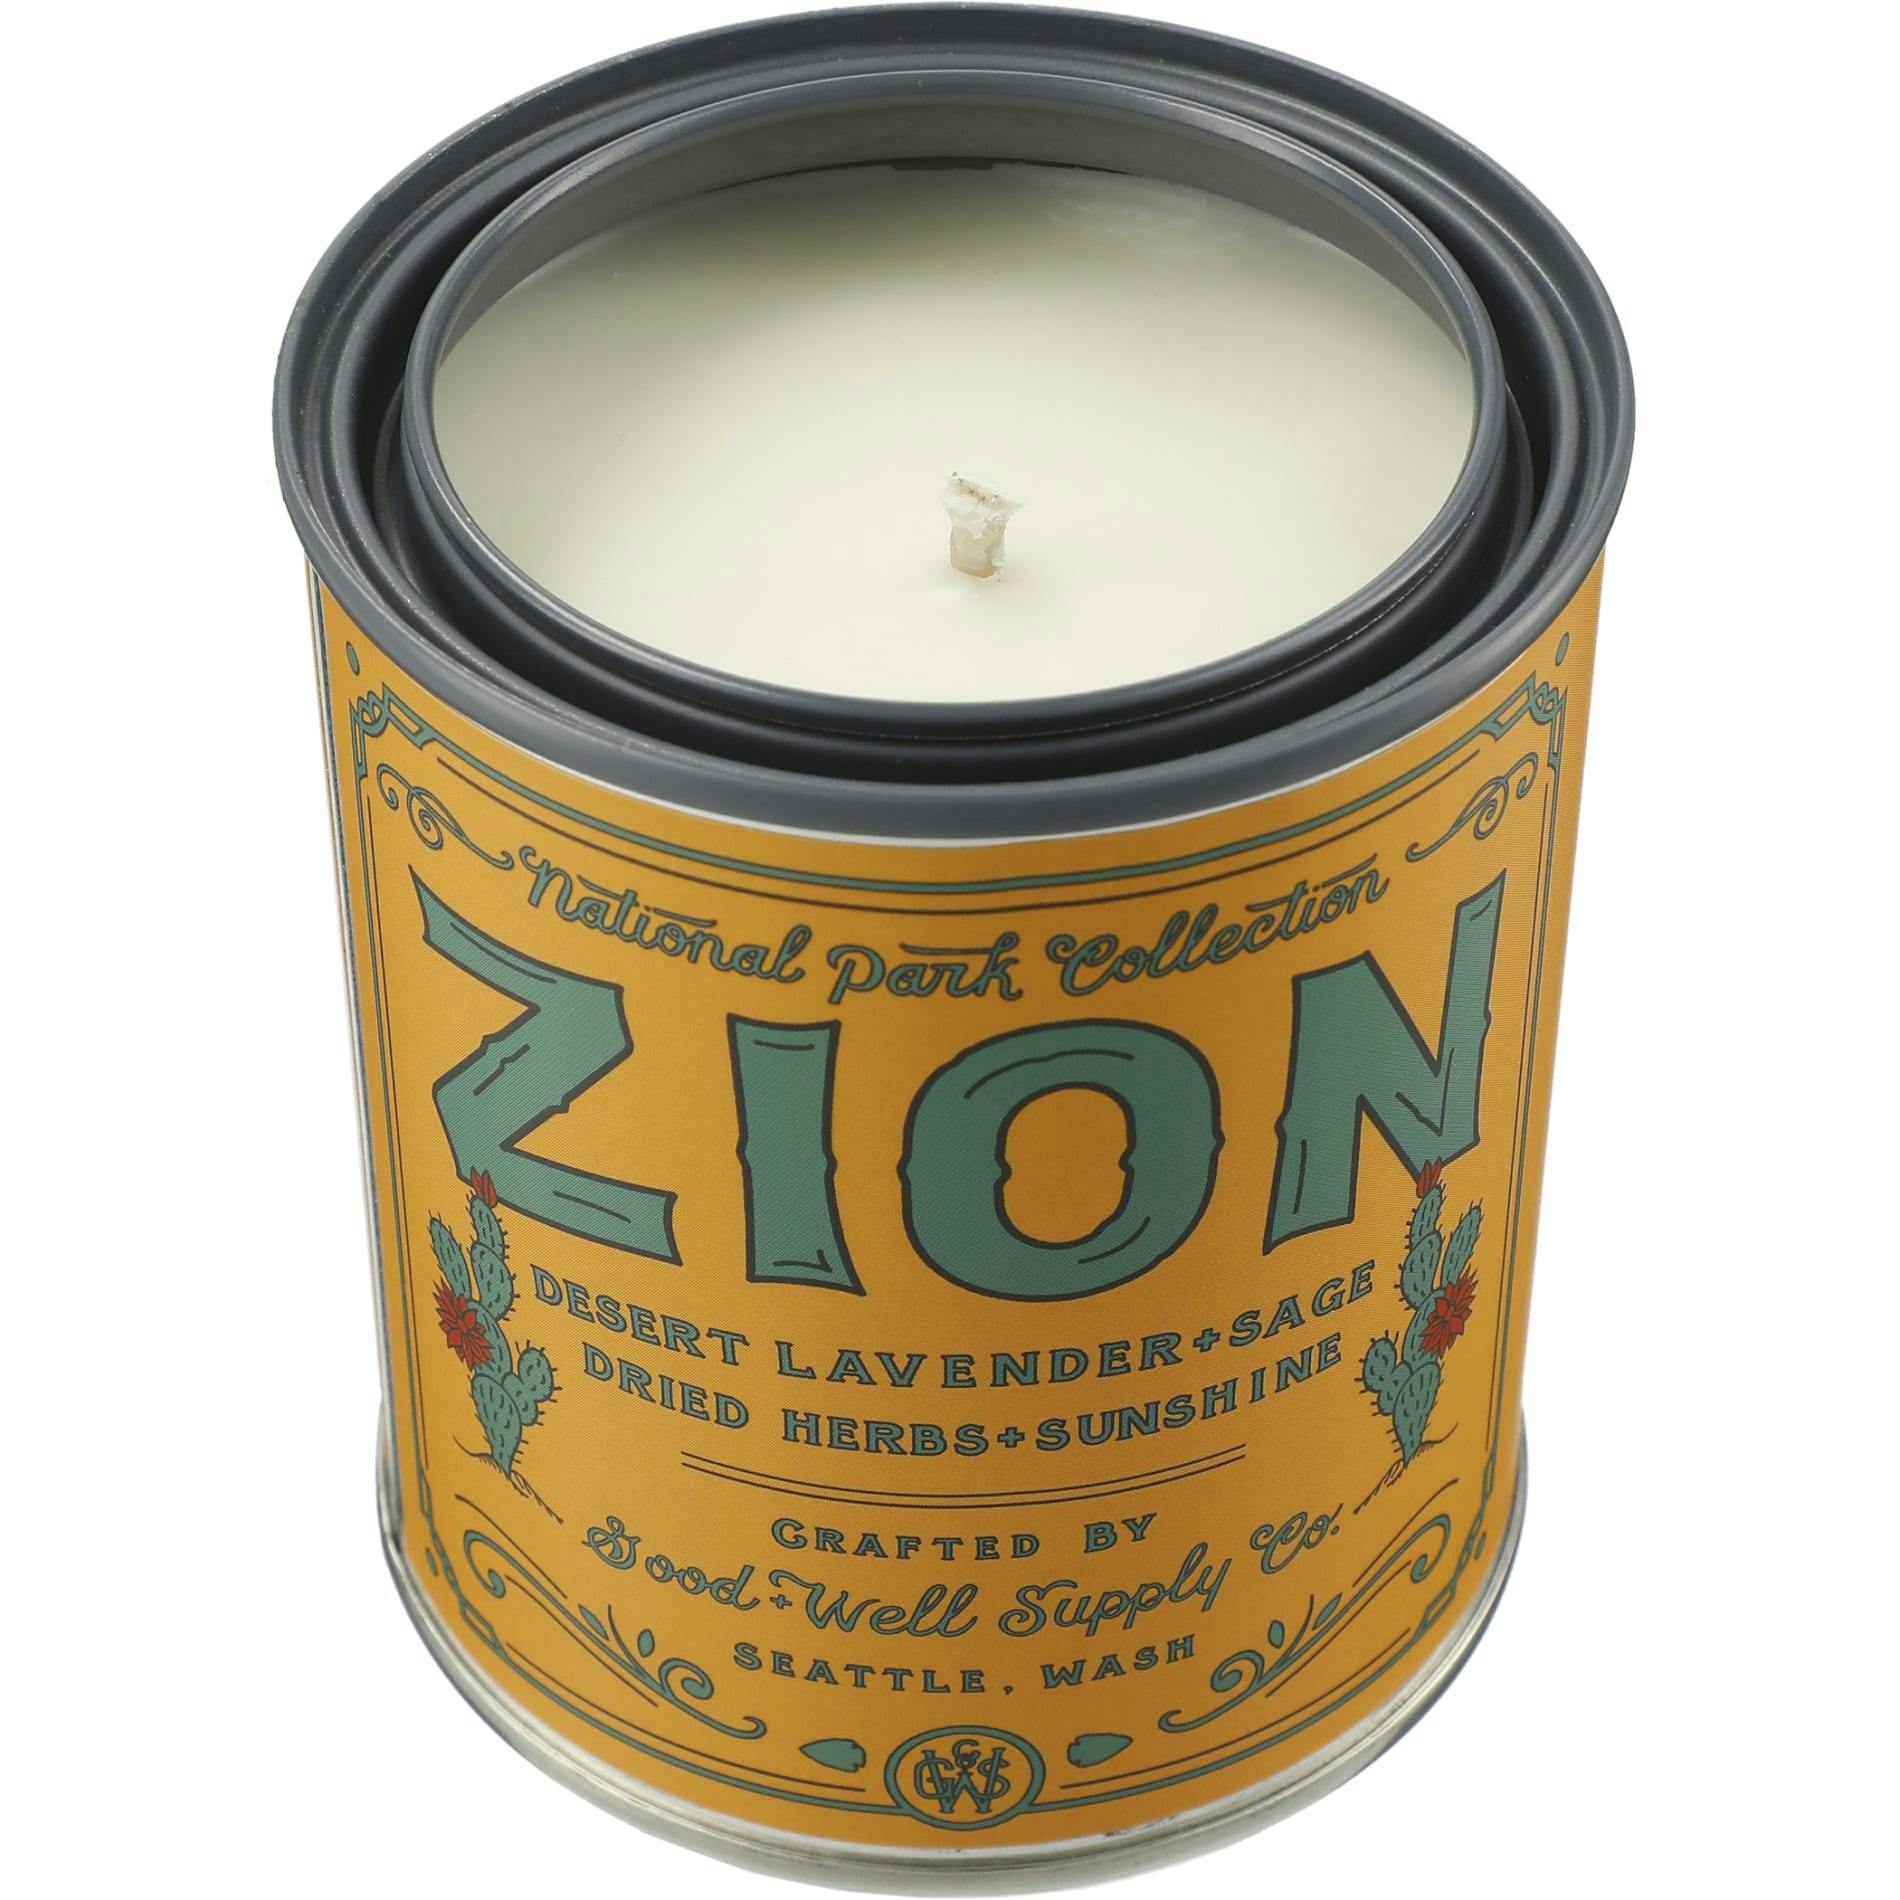 Zion National Park 14 oz Candle - additional Image 3